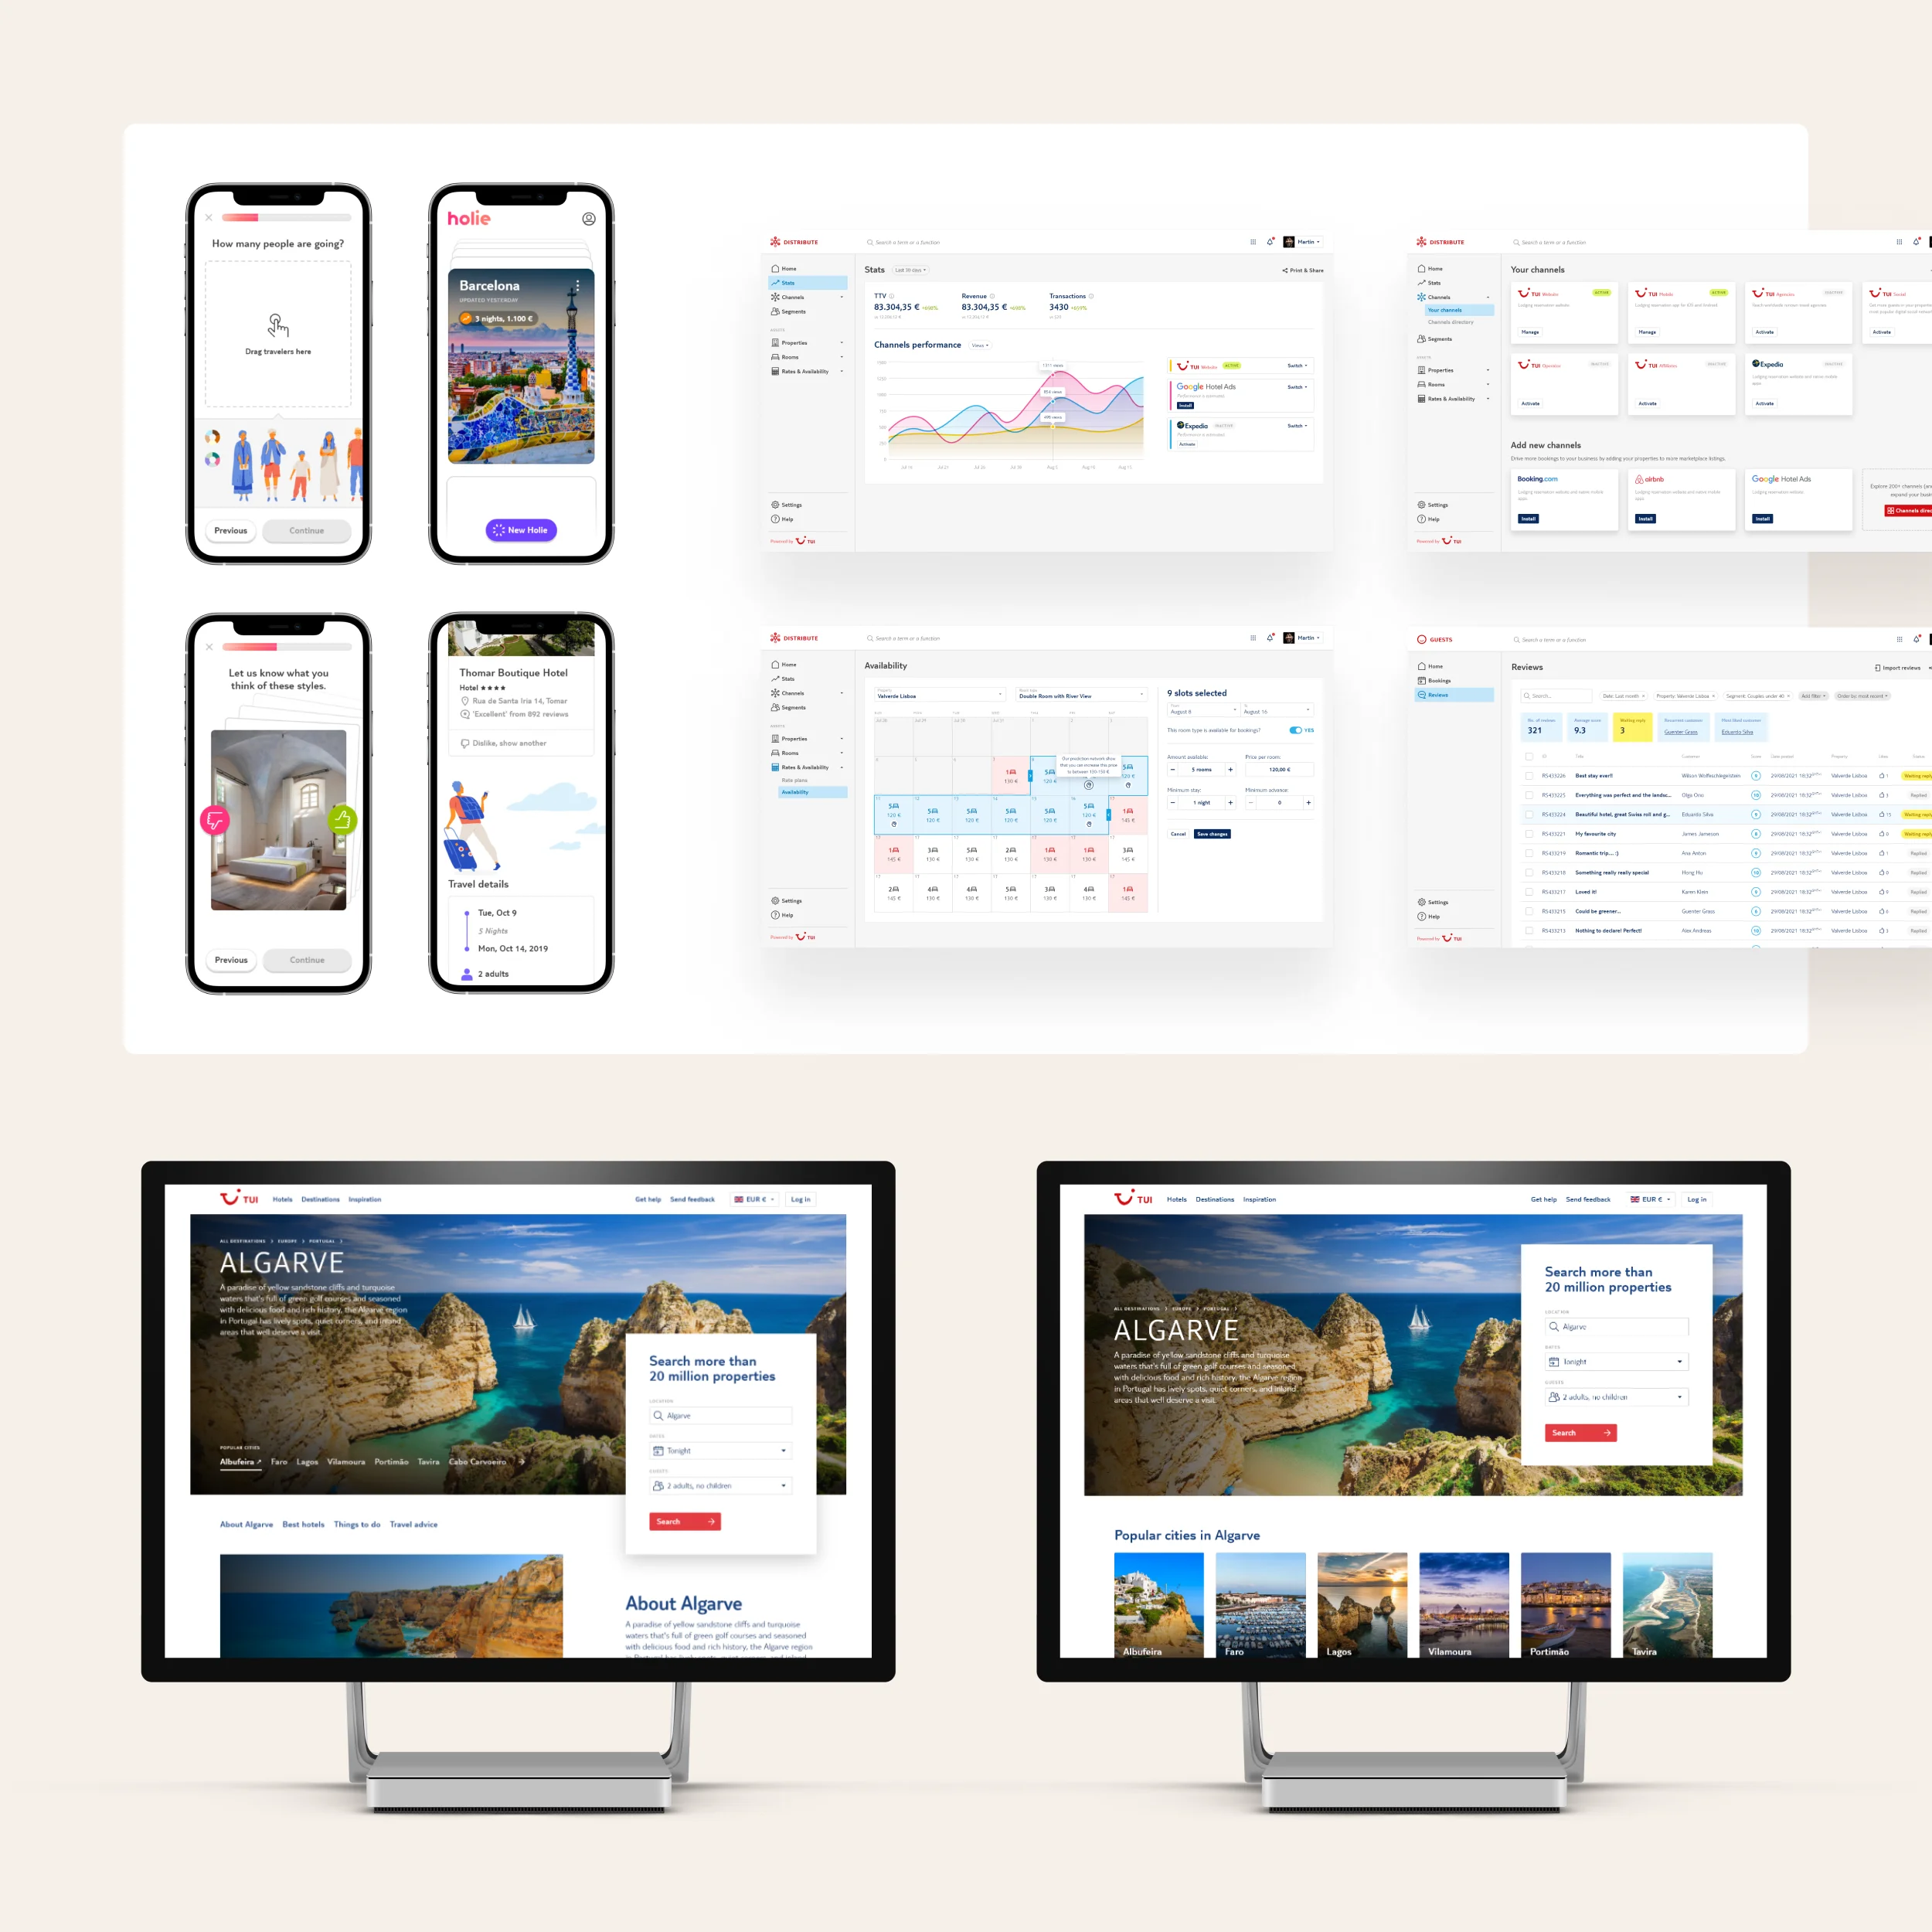 Compilation of web design mockups. They are all about traveling apps displaying mainly destination imagery, like landscapes and cities, but also some back-office concepts with calendars and room availability in hotel booking scenarios.